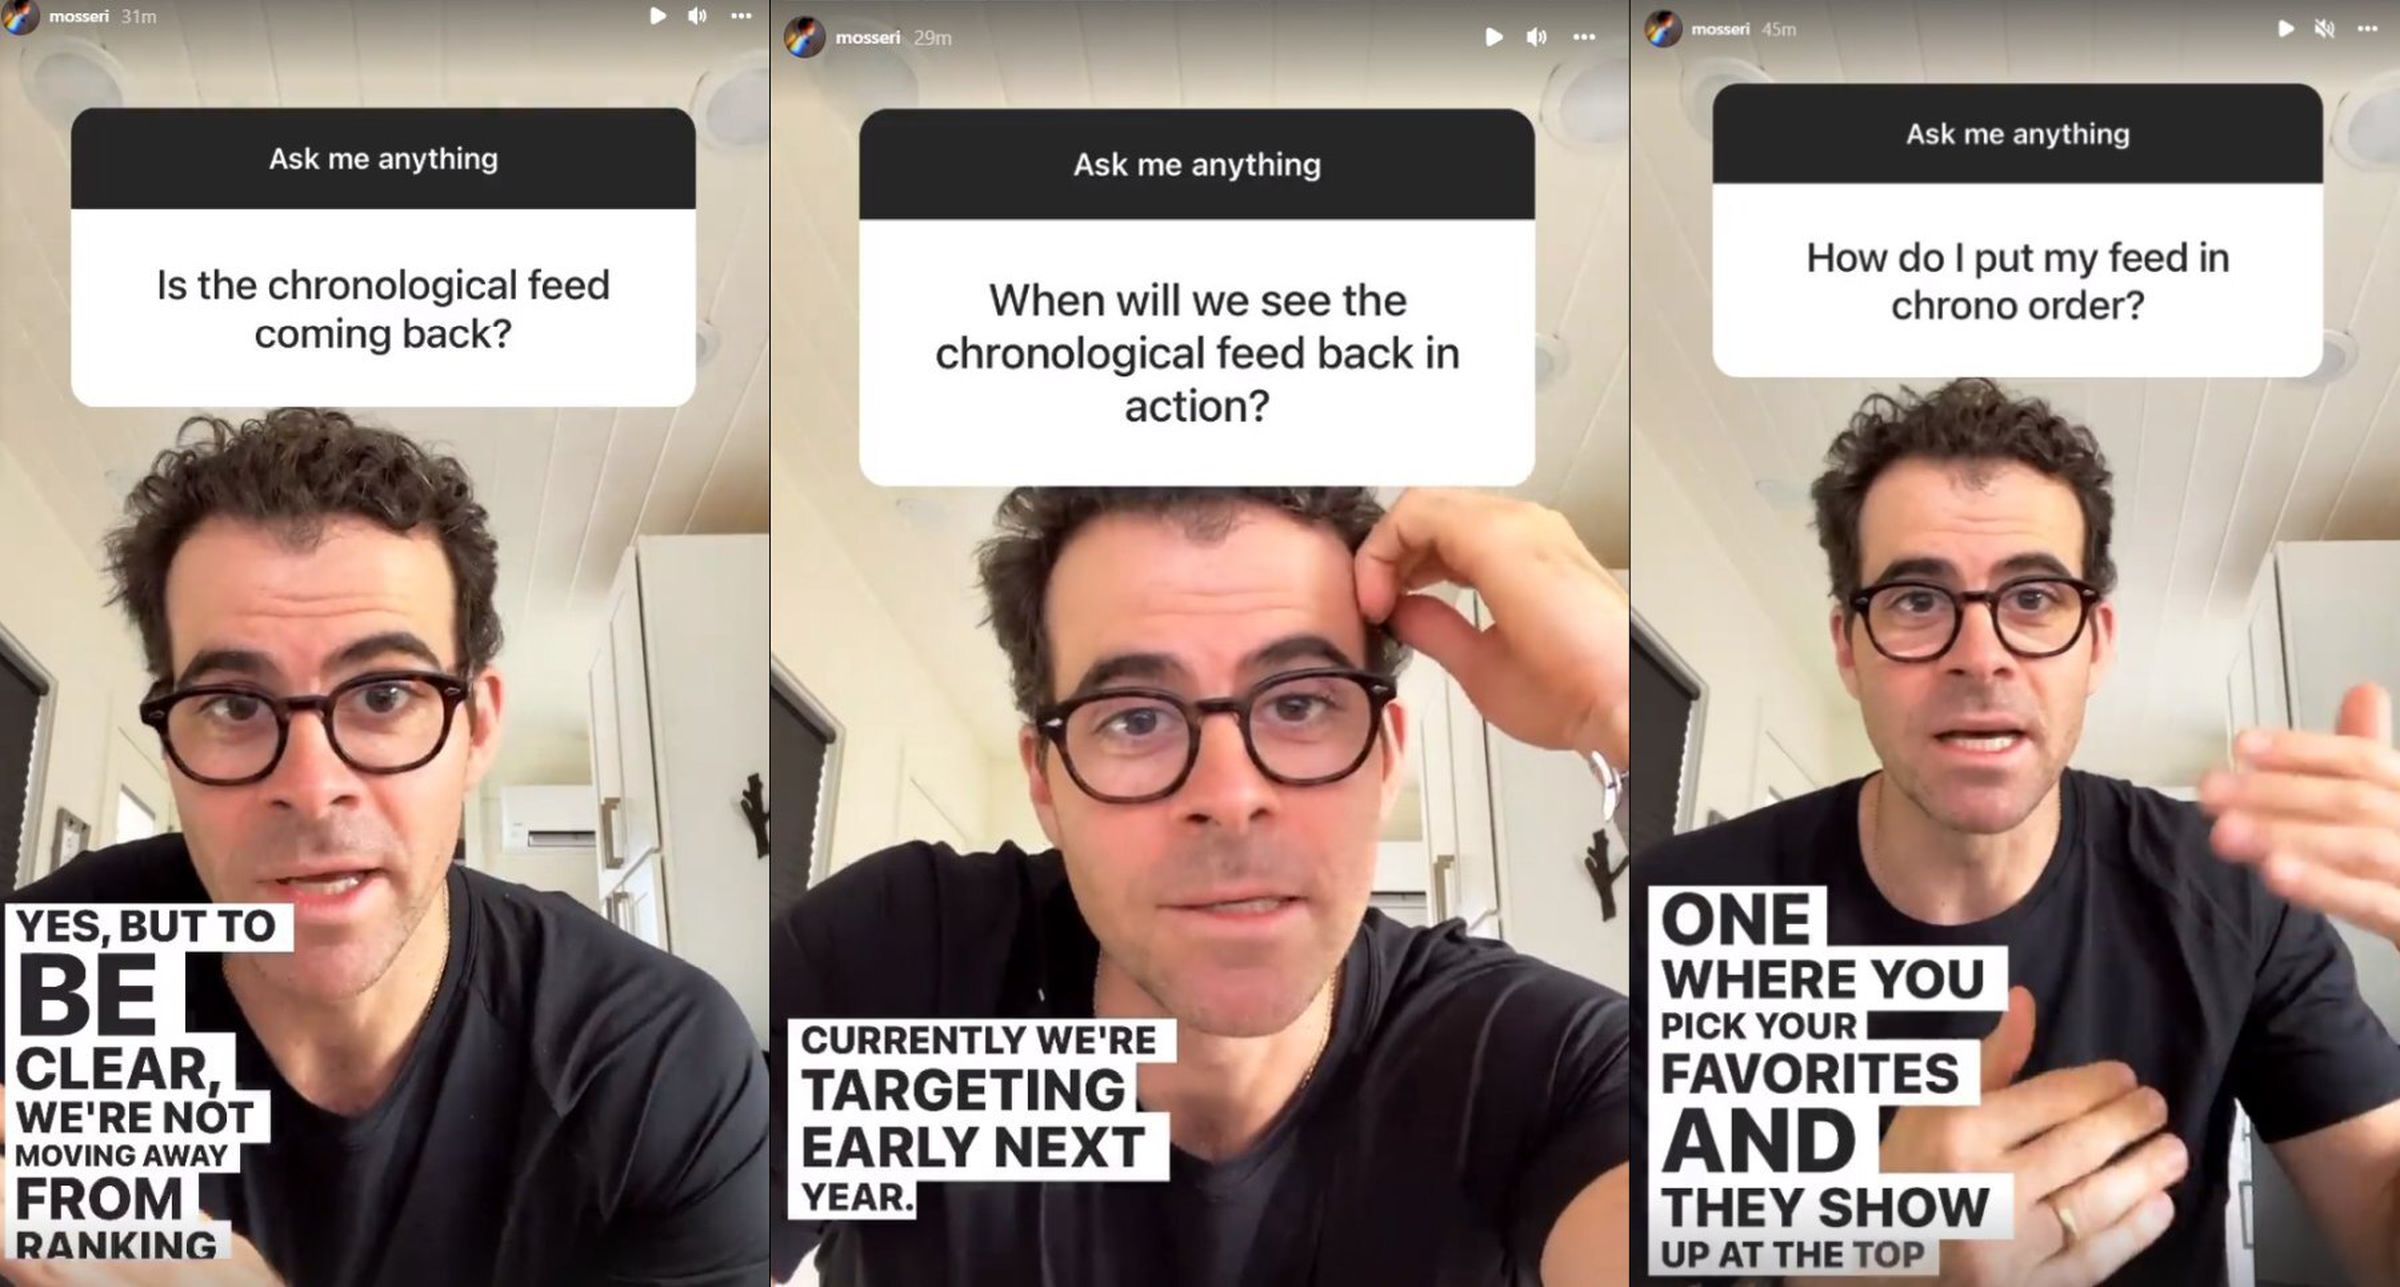 Instagram wants to release the feature “early next year.”